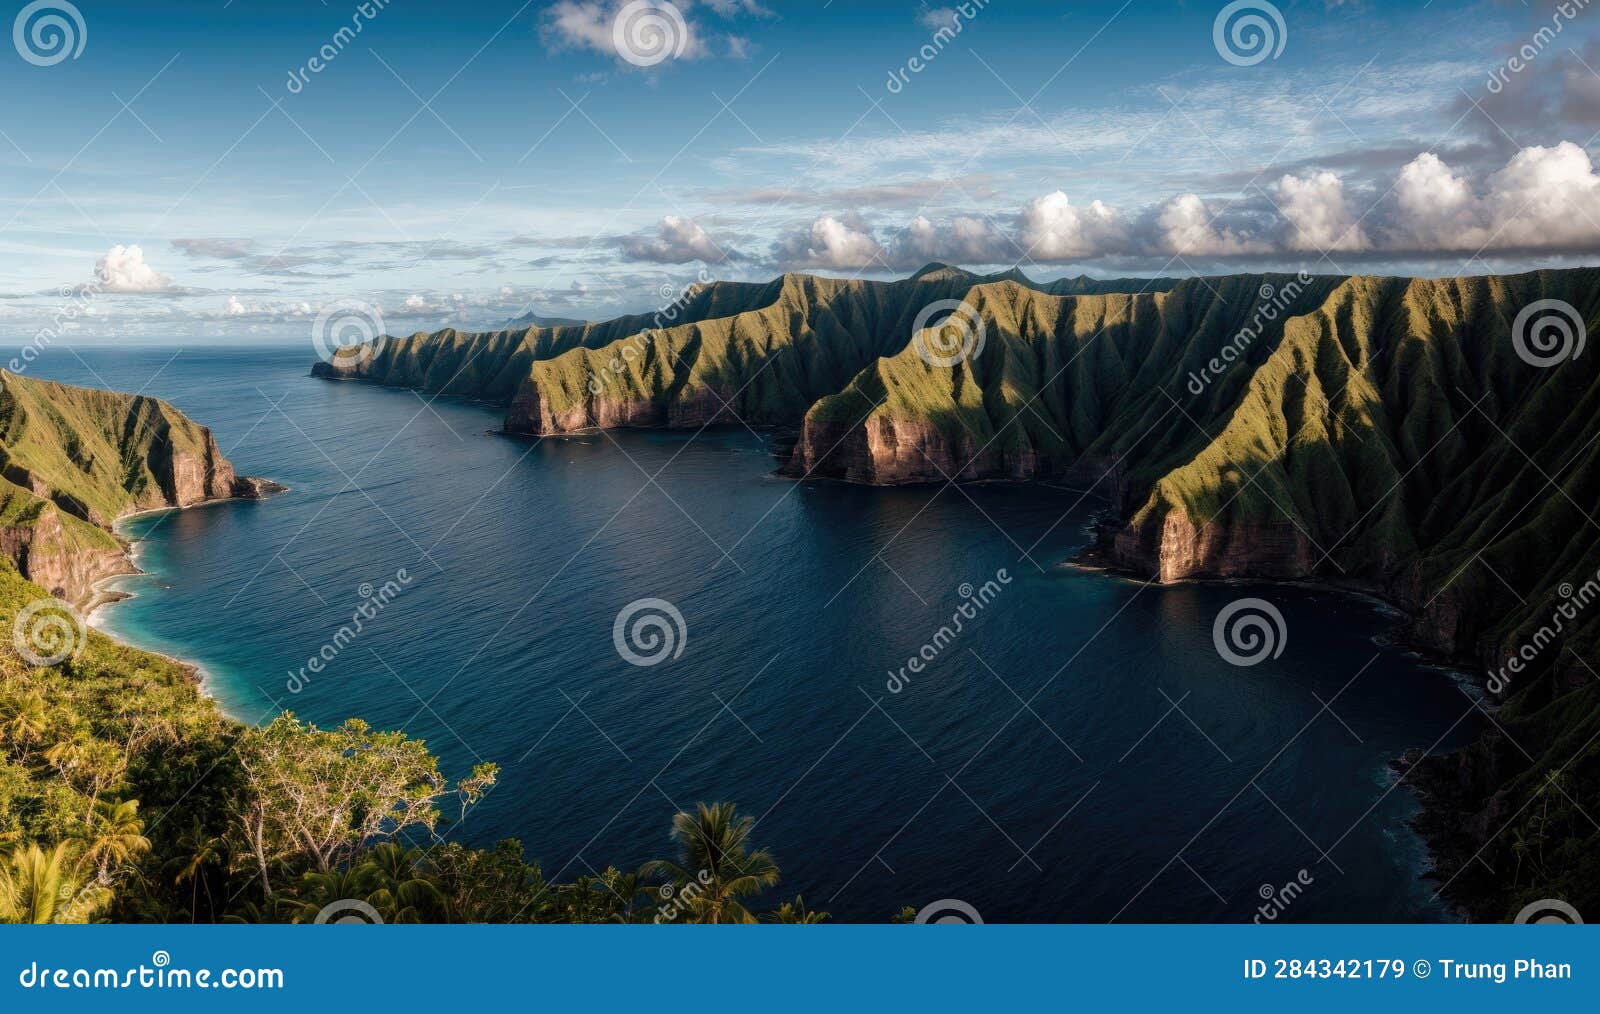 aerial view of major cliffs on tropical island paradise